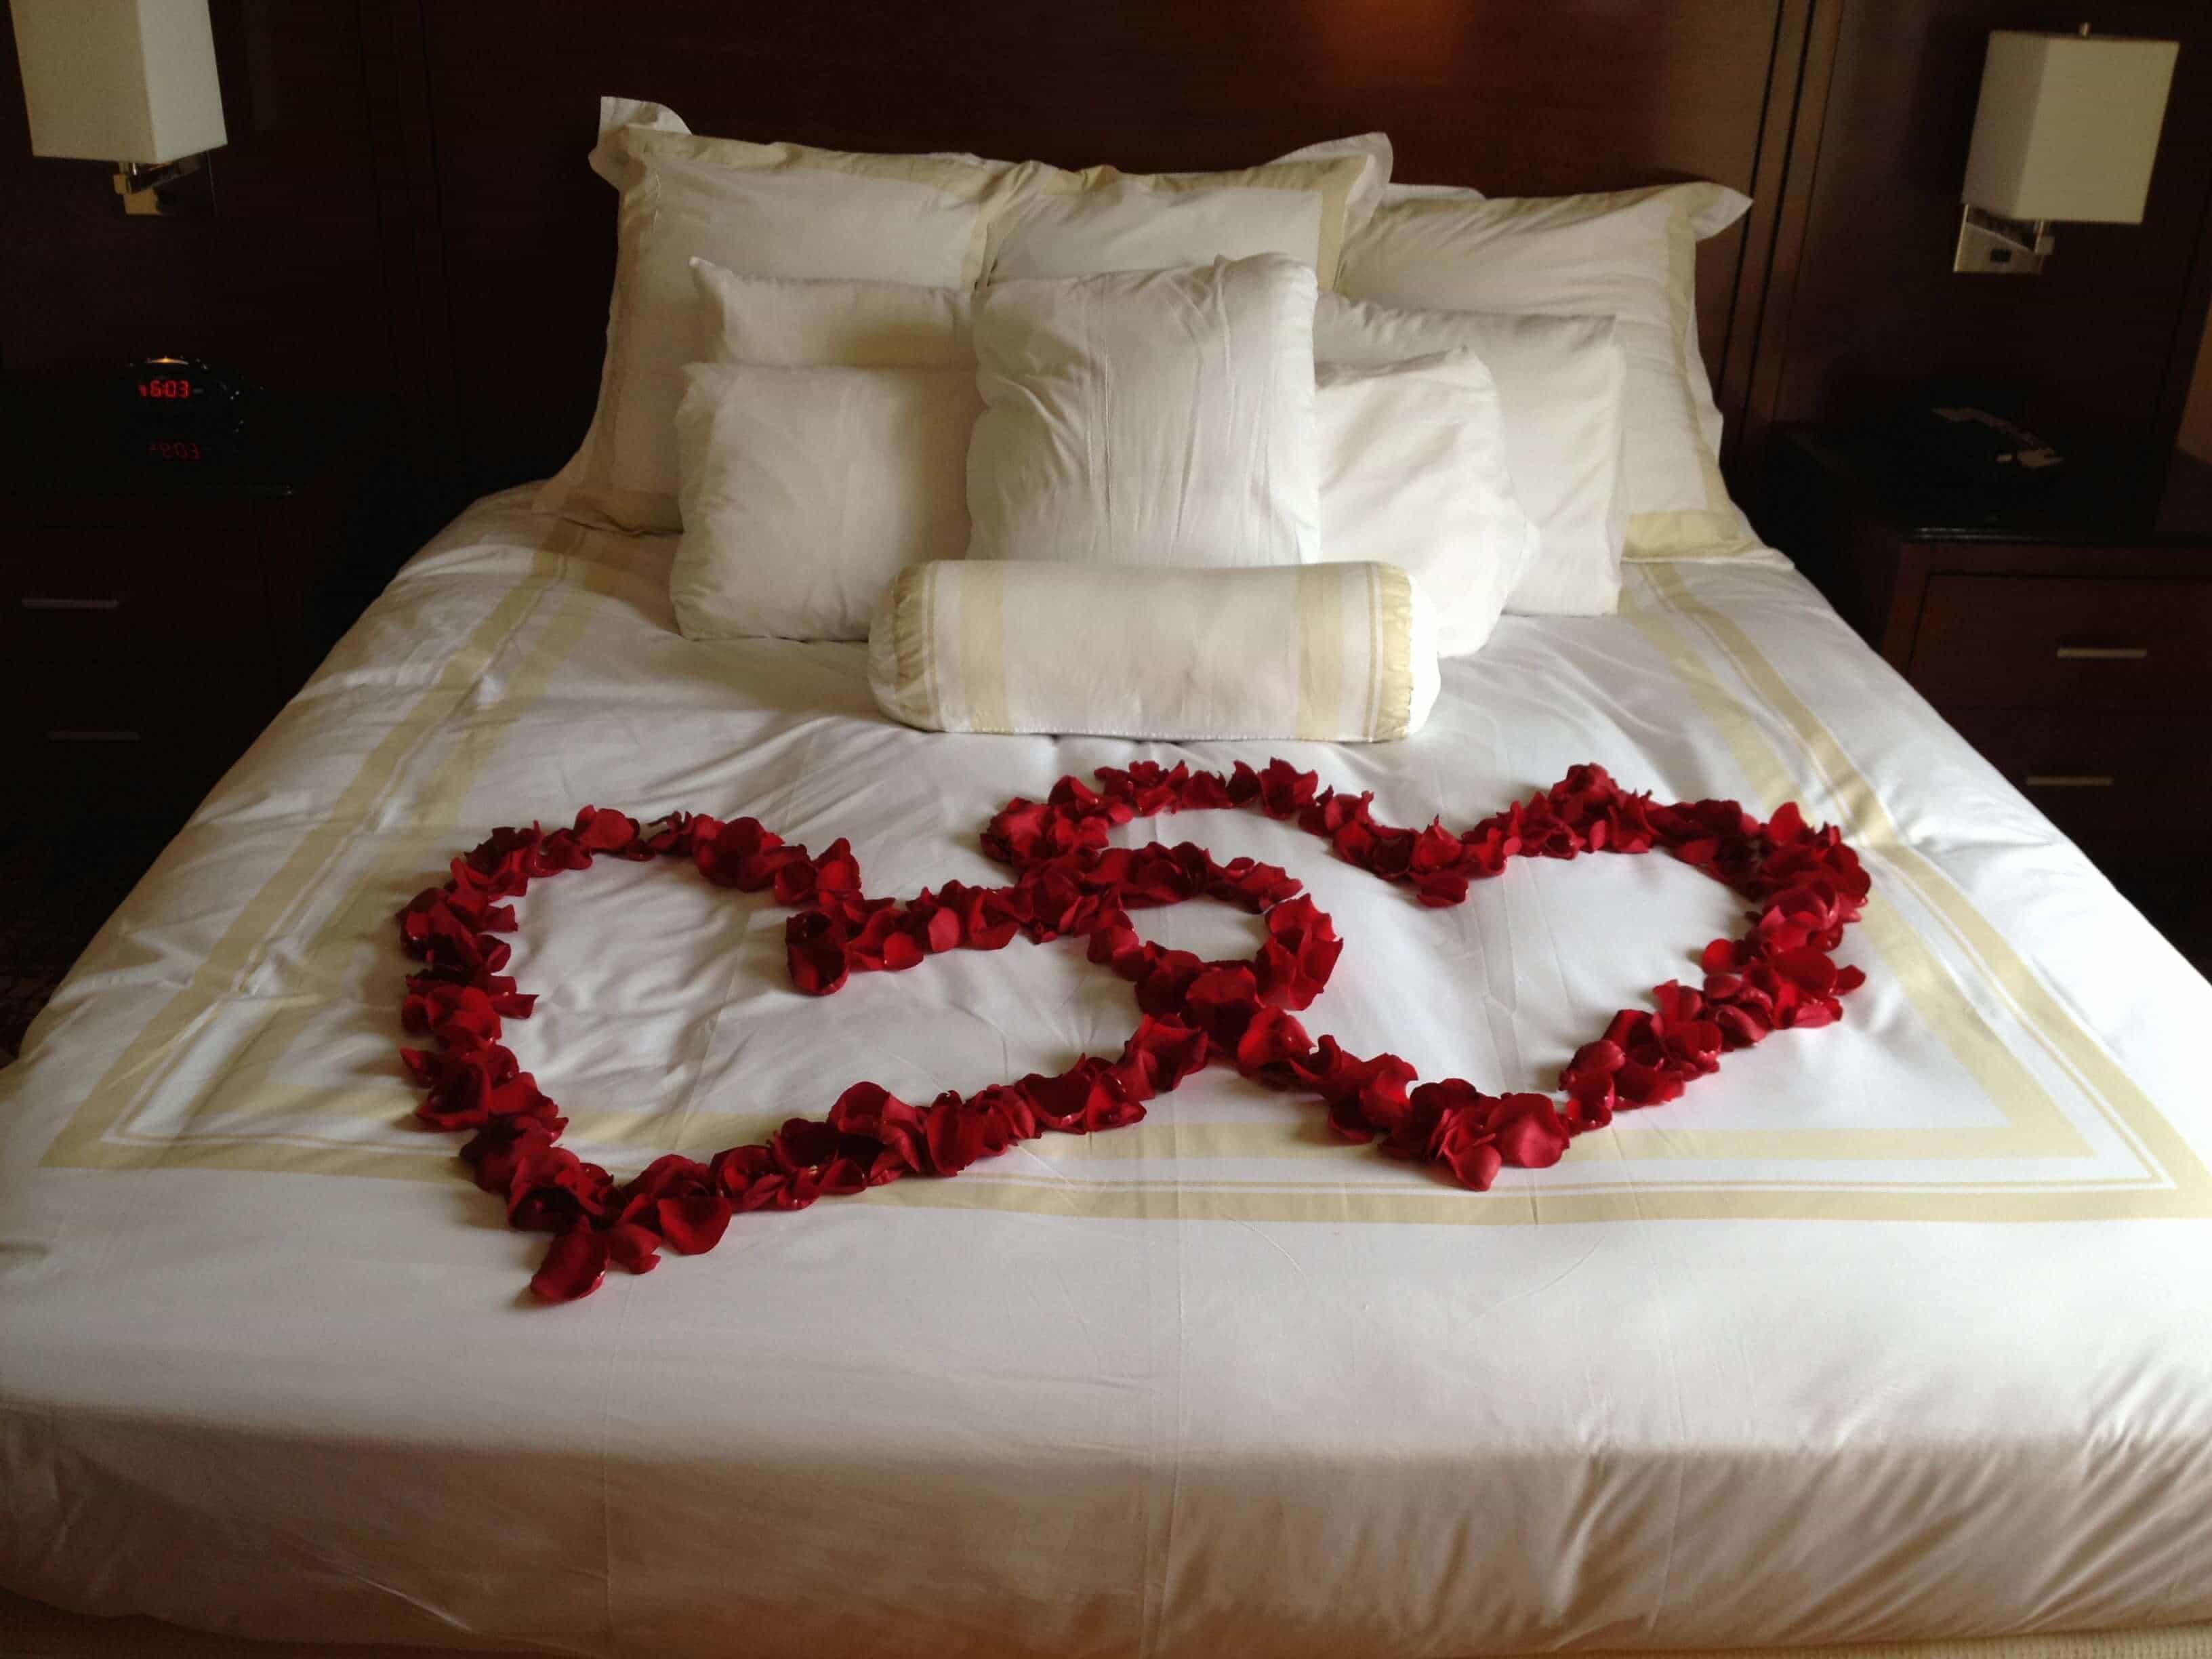 Romantic Bedroom Decoration Ideas For Valentine S Day The Architecture Designs